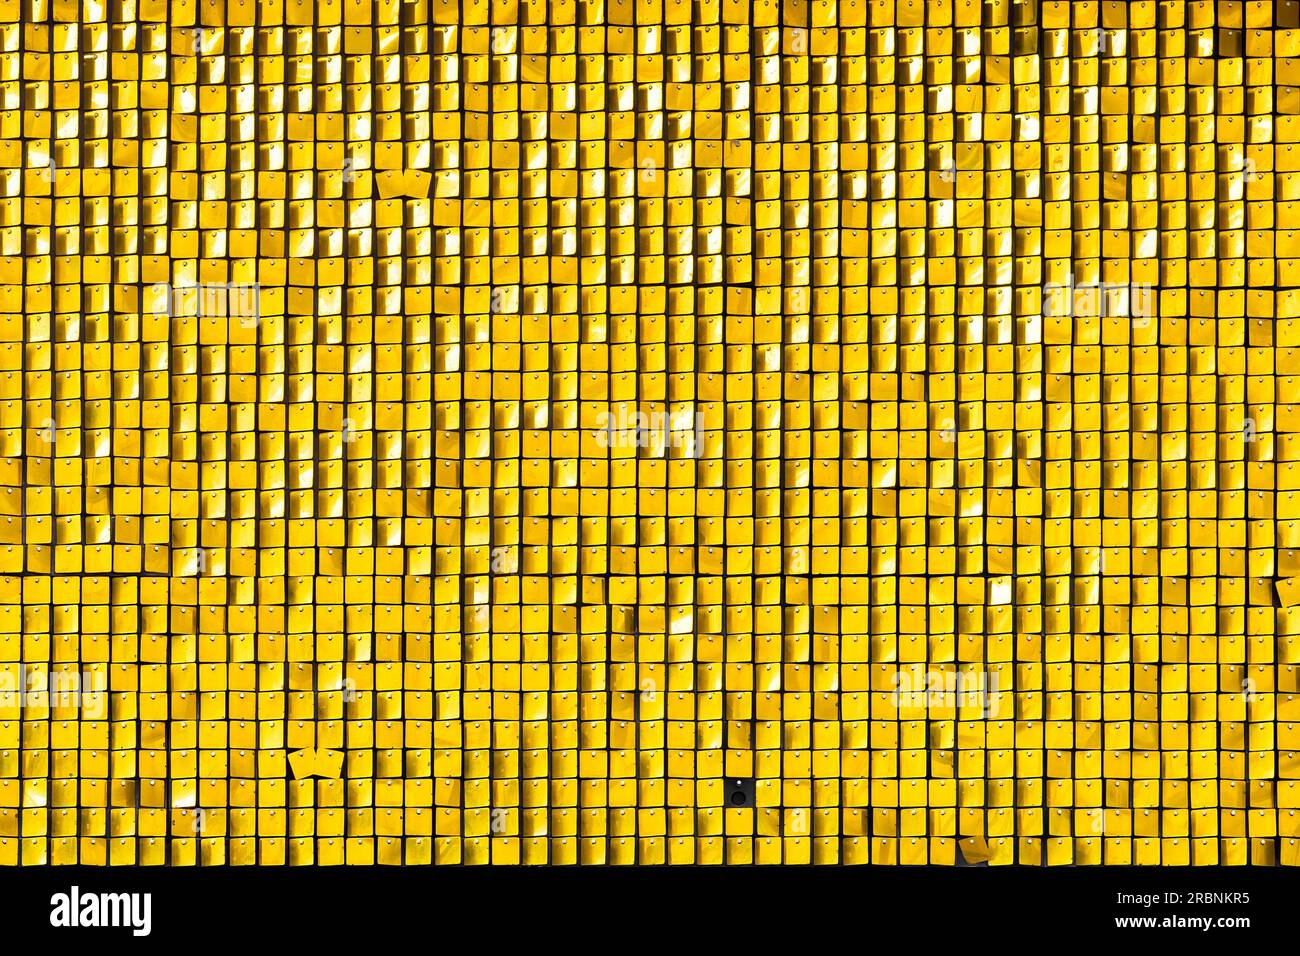 A display made up of small yellow squares made of plastic and group close together. The squares shimmer in the sunlight as a breeze gently moves them Stock Photo